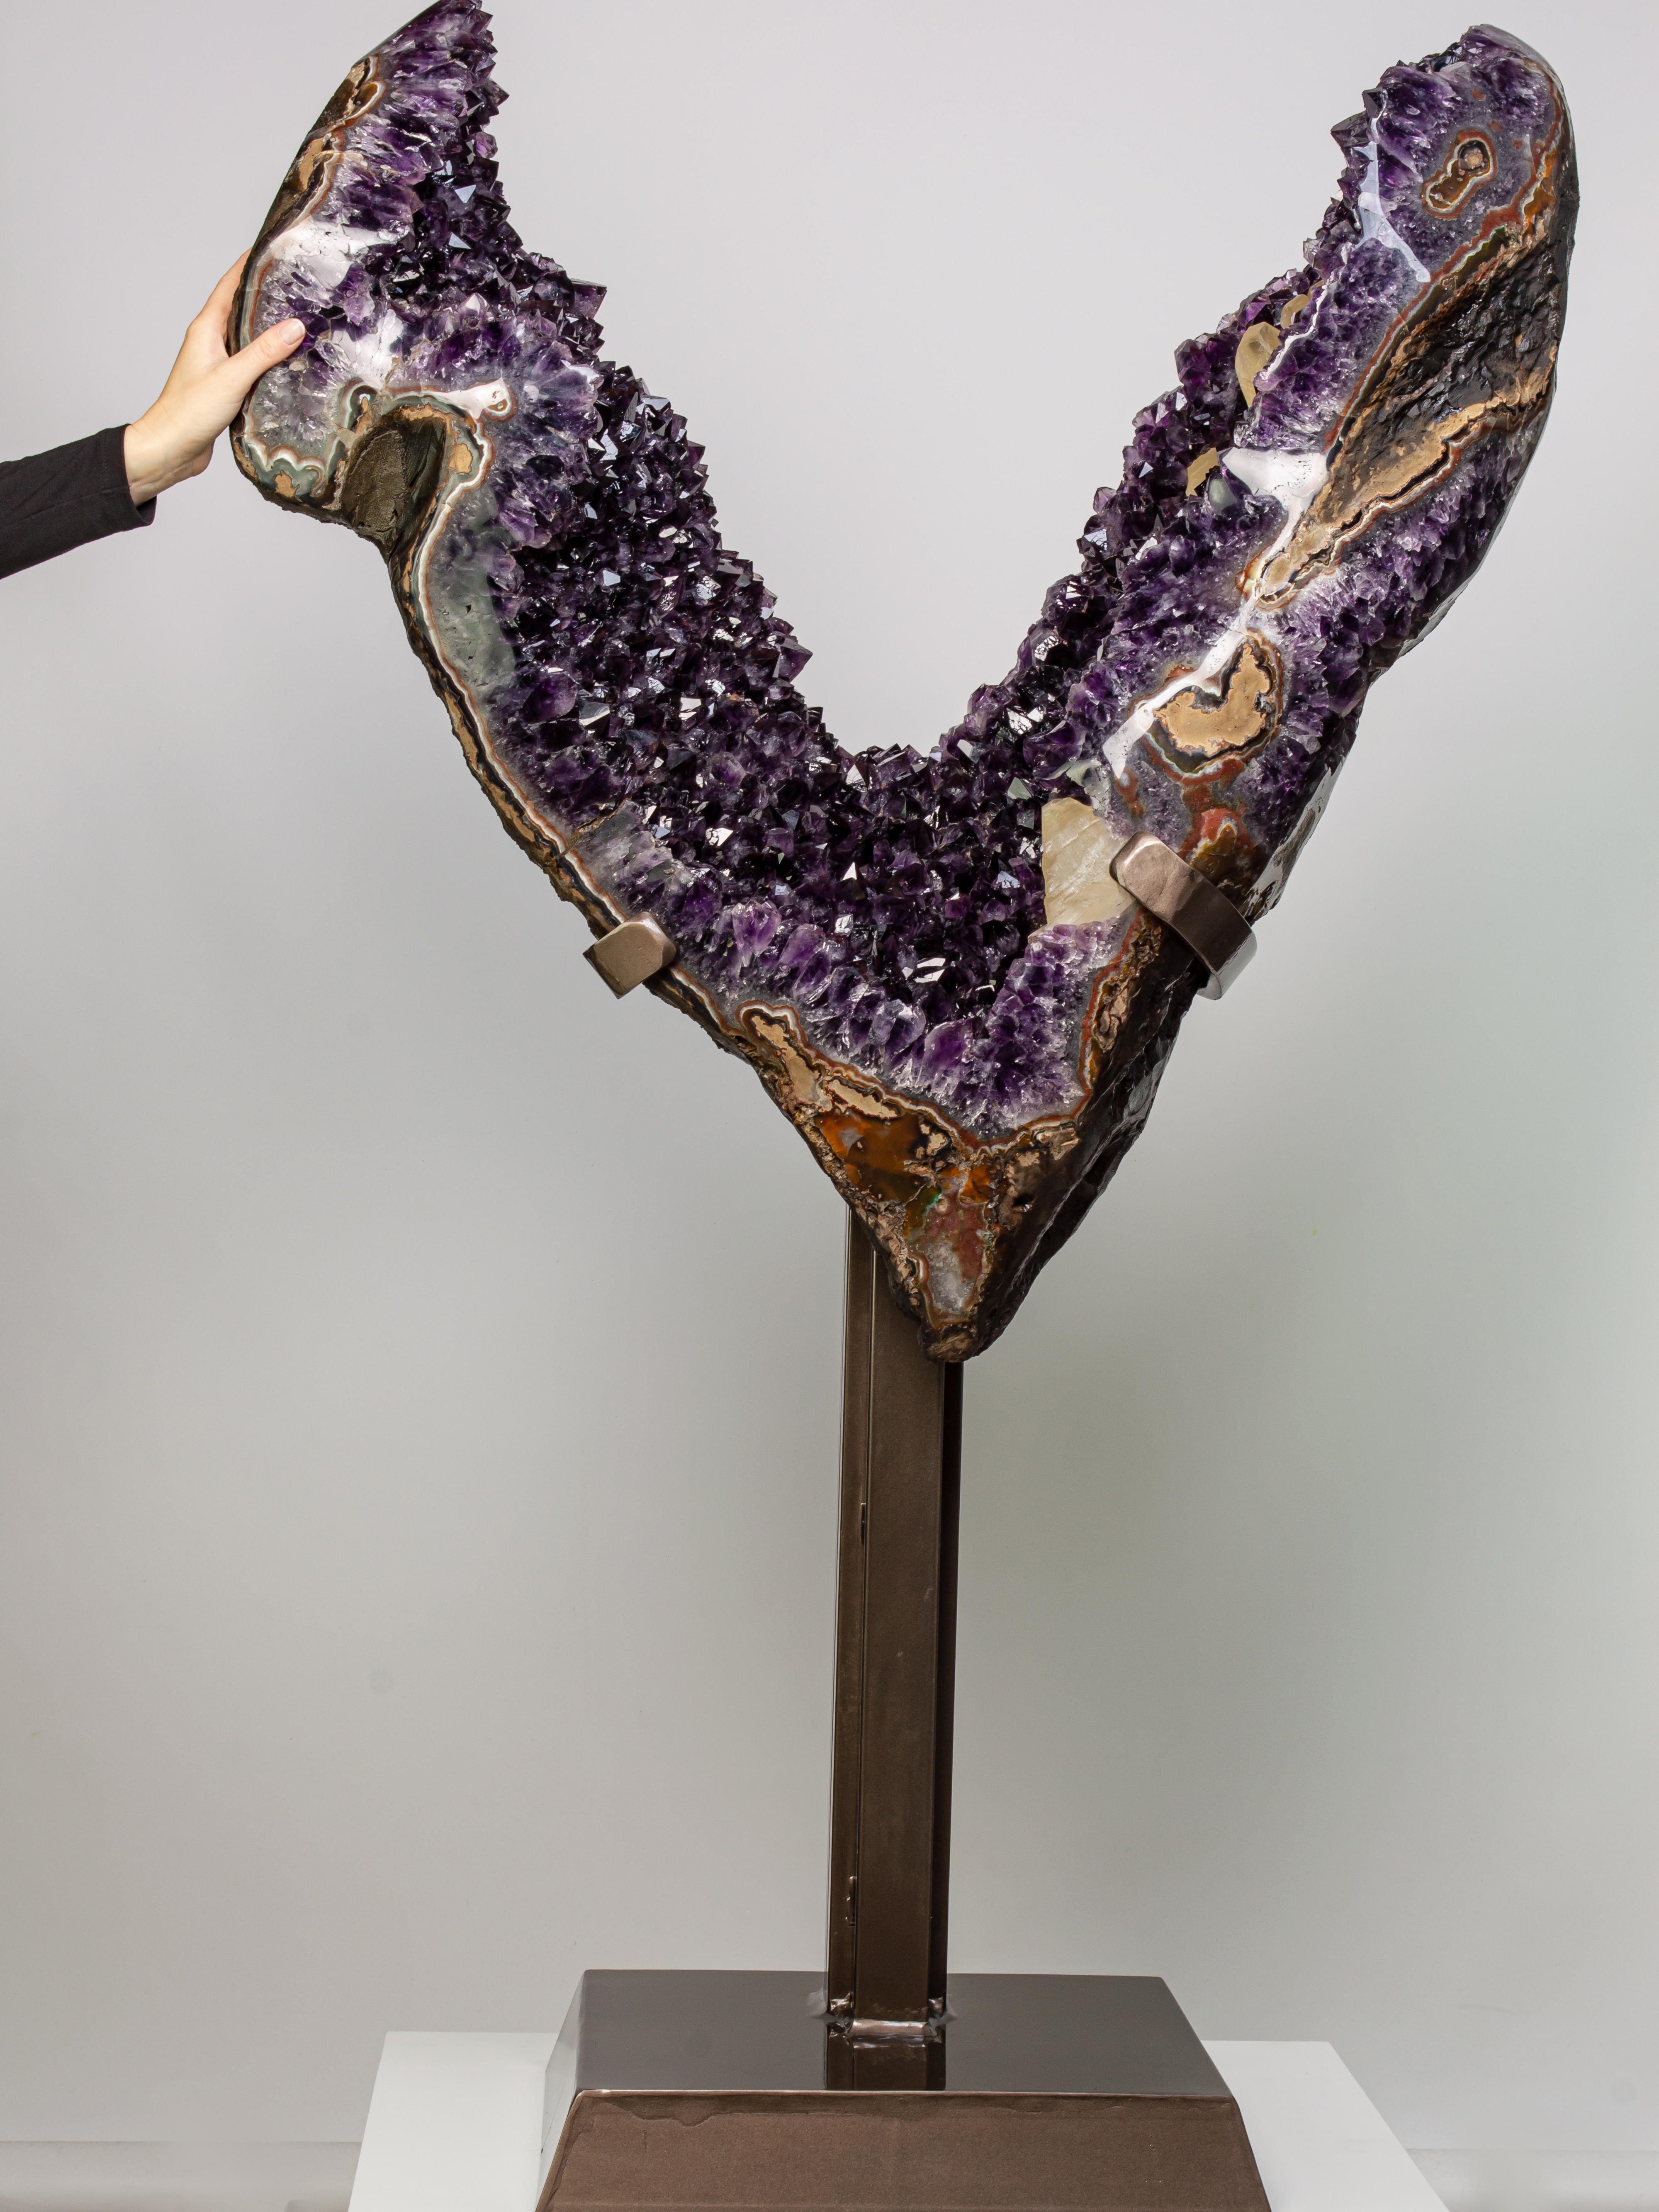 Uruguayan Substantial V-Shaped Amethyst Formation with Calcites